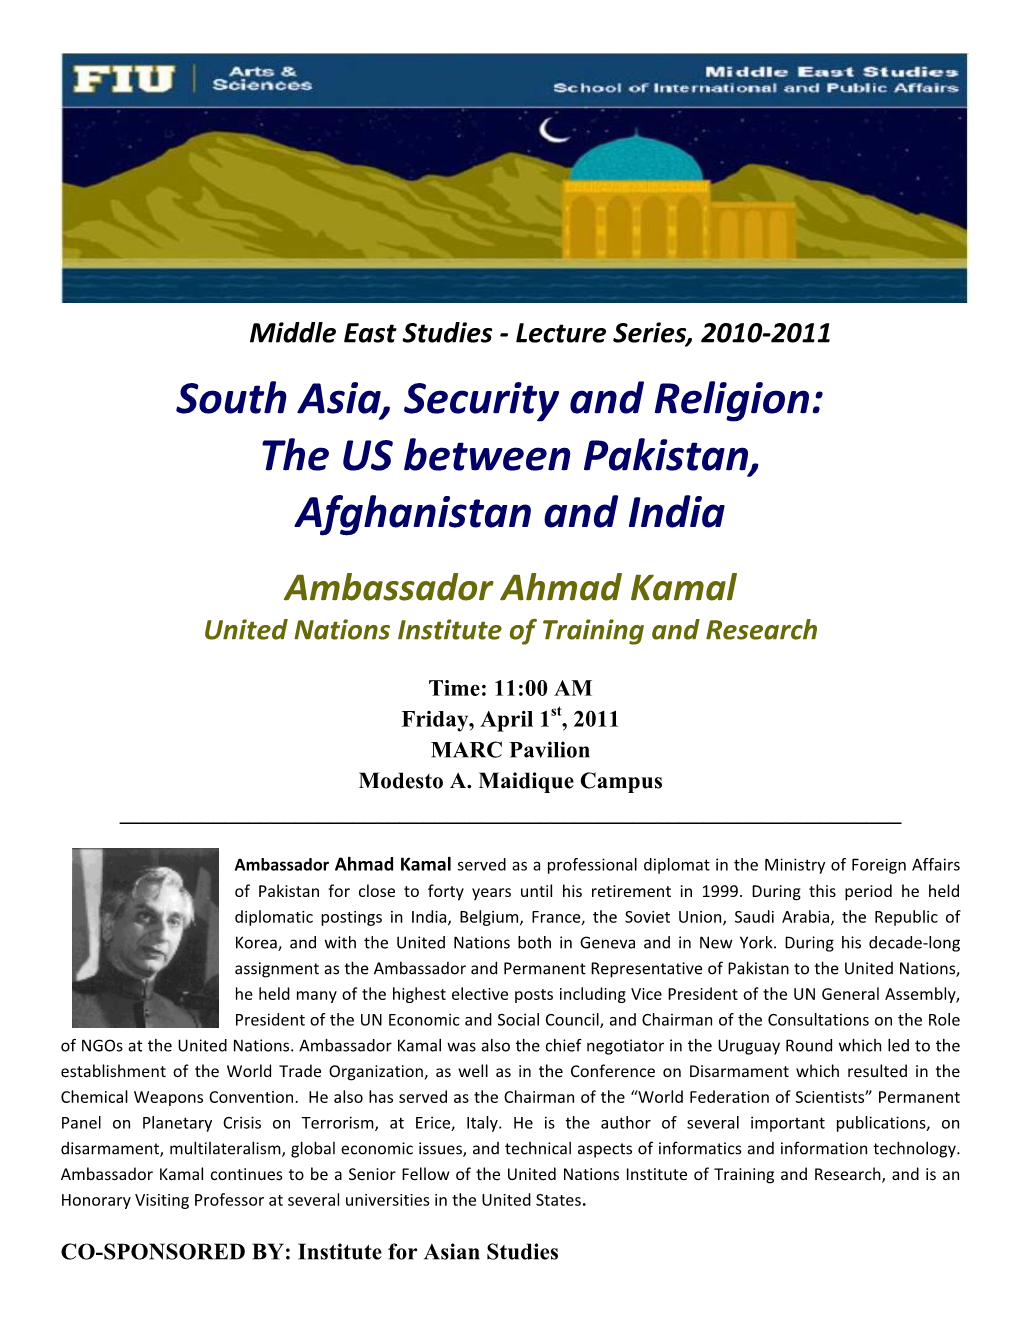 South Asia, Security and Religion: the US Between Pakistan, Afghanistan and India